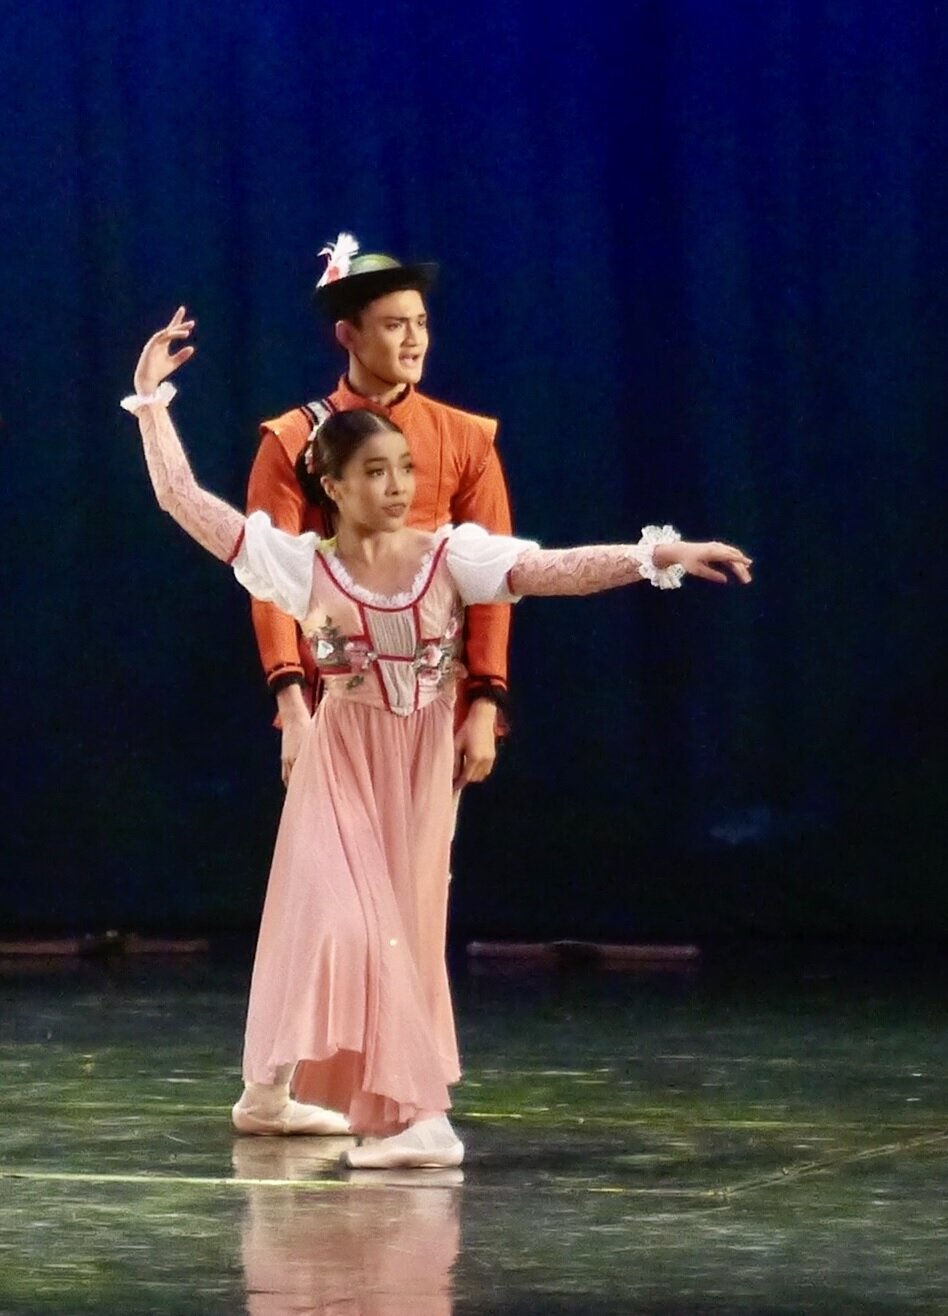    Nicole Barroso wears a rose-colored outfit that matches her pink pointe shoes as one of the ladies in the hunting party in 2019’s  Snow White.  With her is Joshua Enciso as a hunter, clad in orange. Photo by Giselle P. Kasilag   